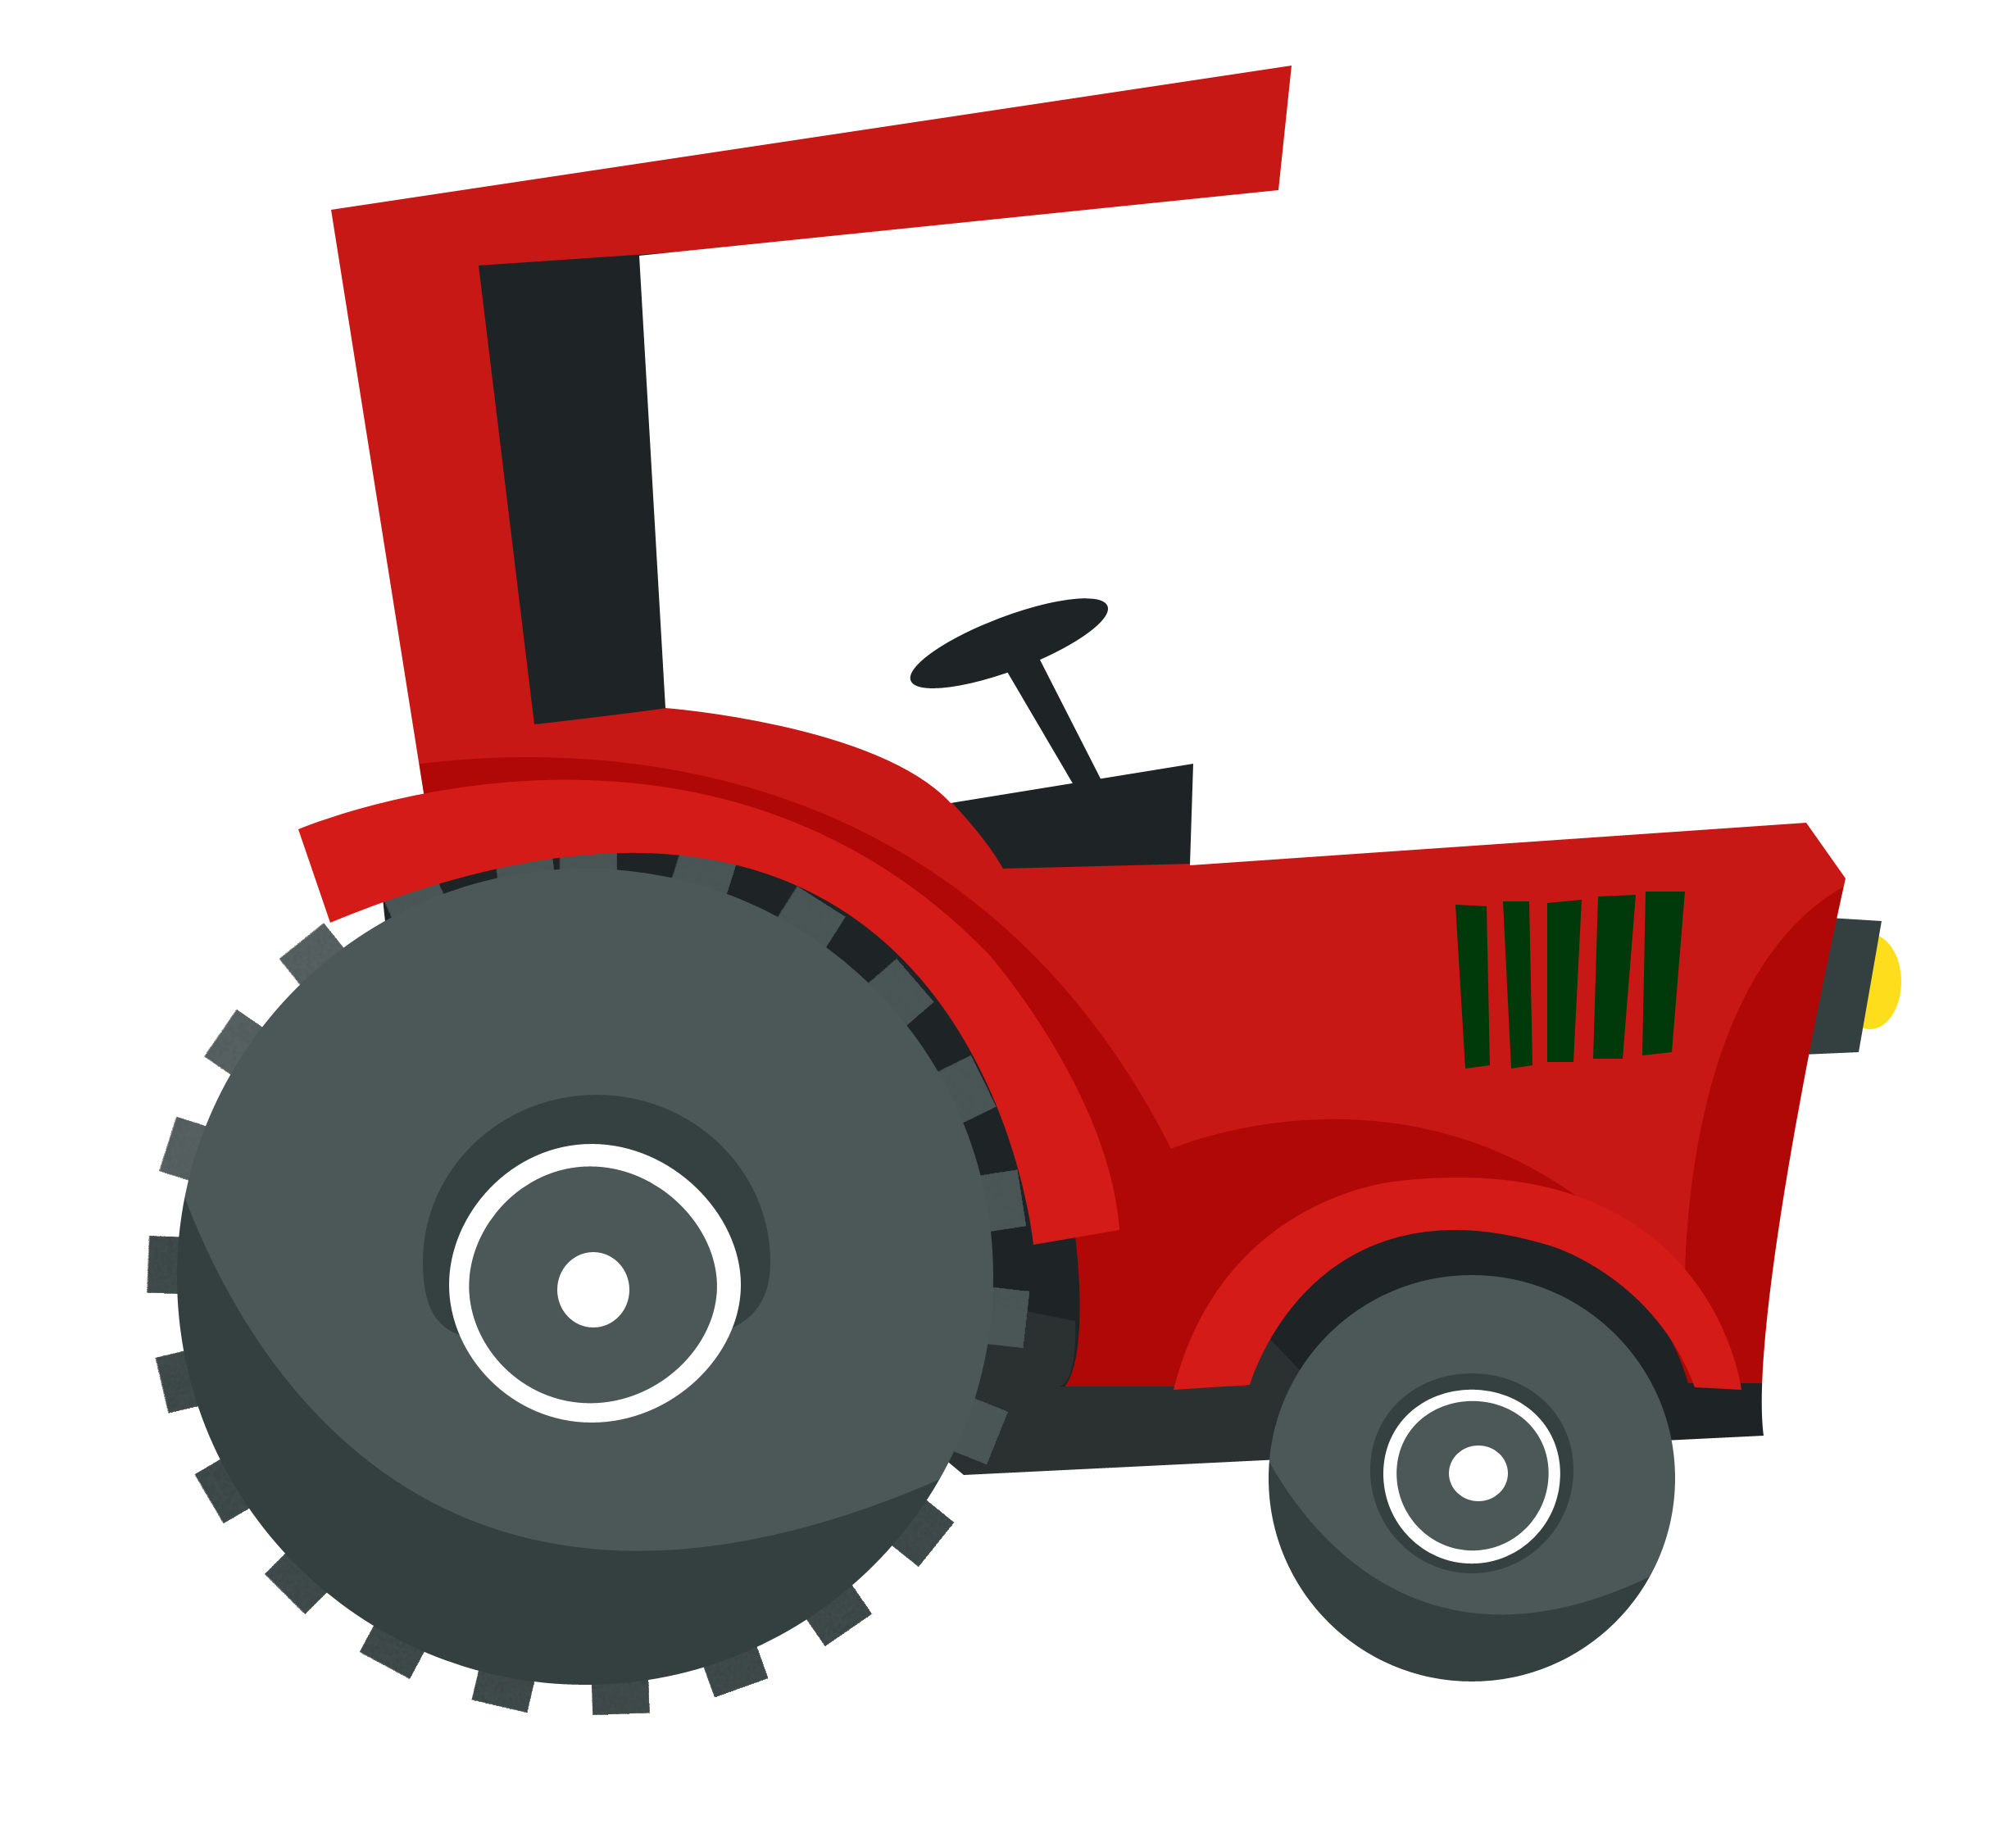 farmers clipart tractor